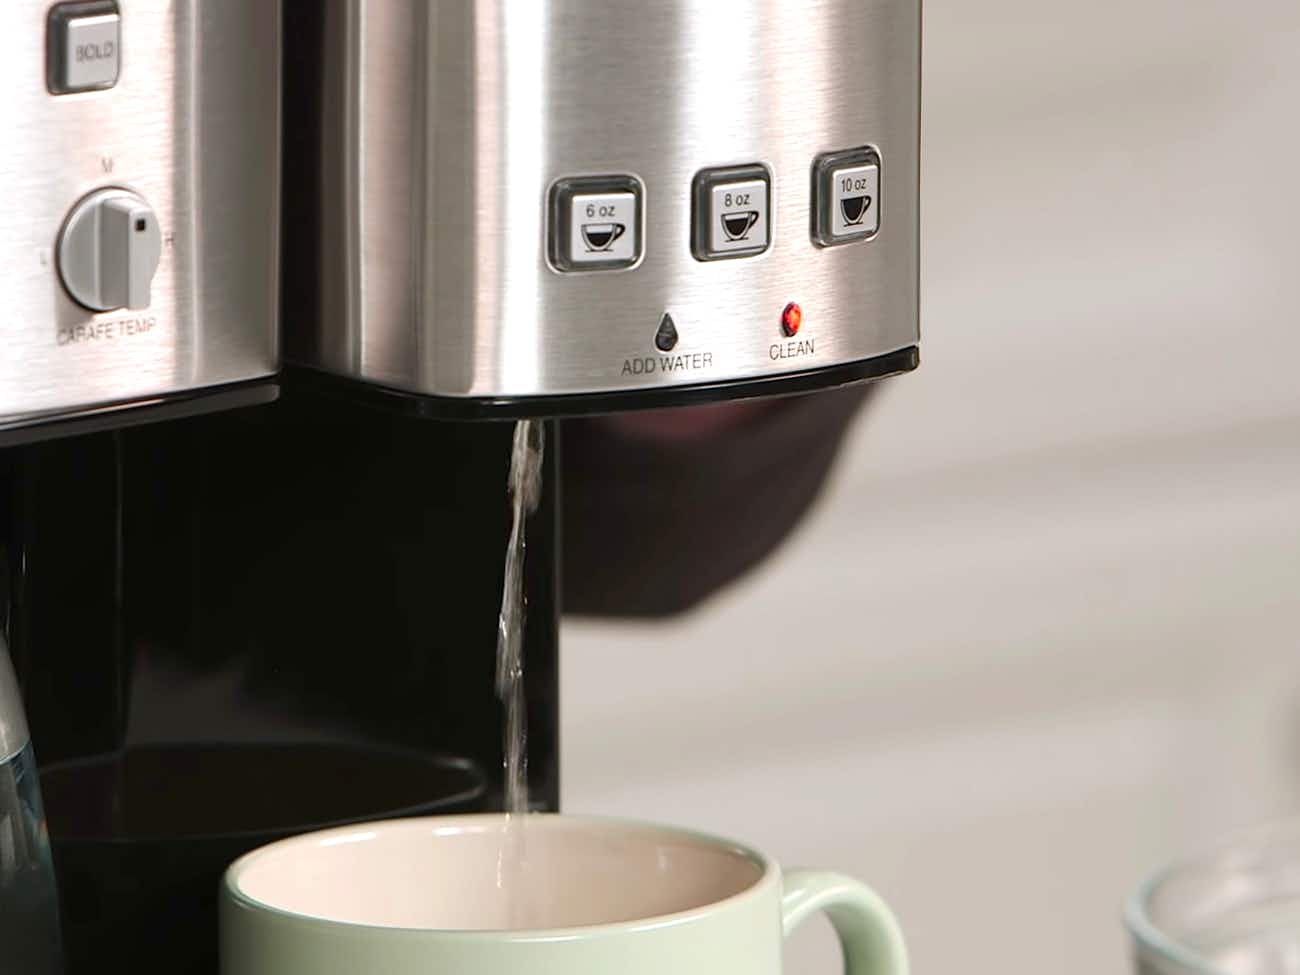 How to clean a Cuisinart coffee maker